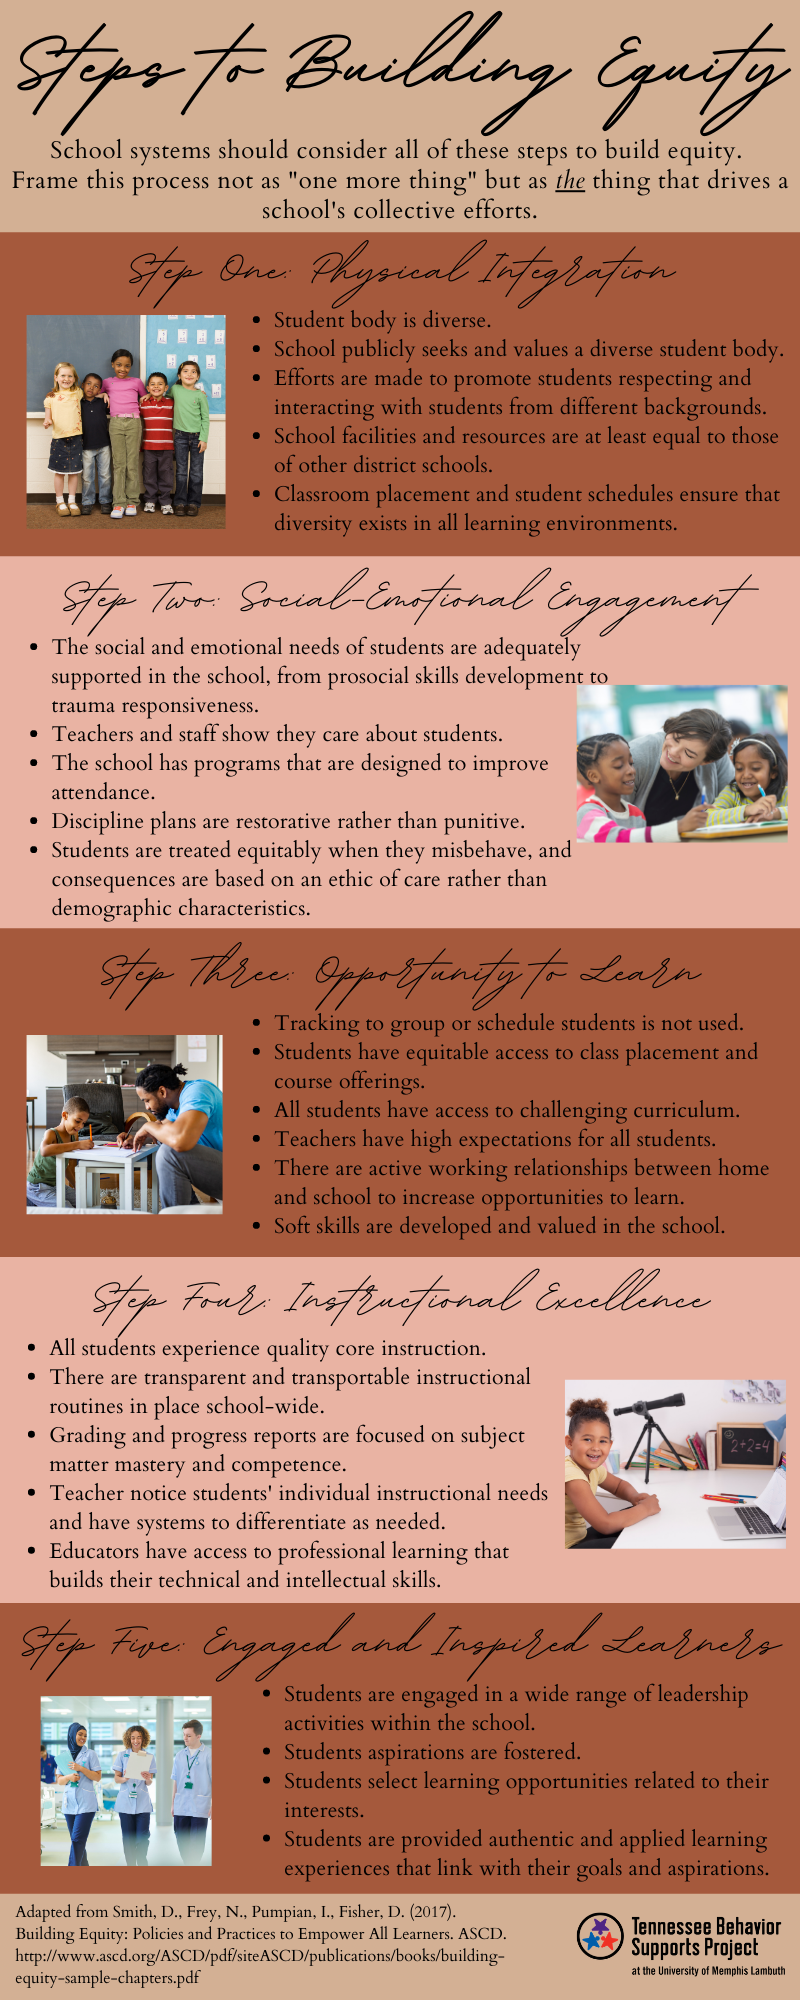 Infographic: Steps to Building Equity. Click to download a PDF version of this image.